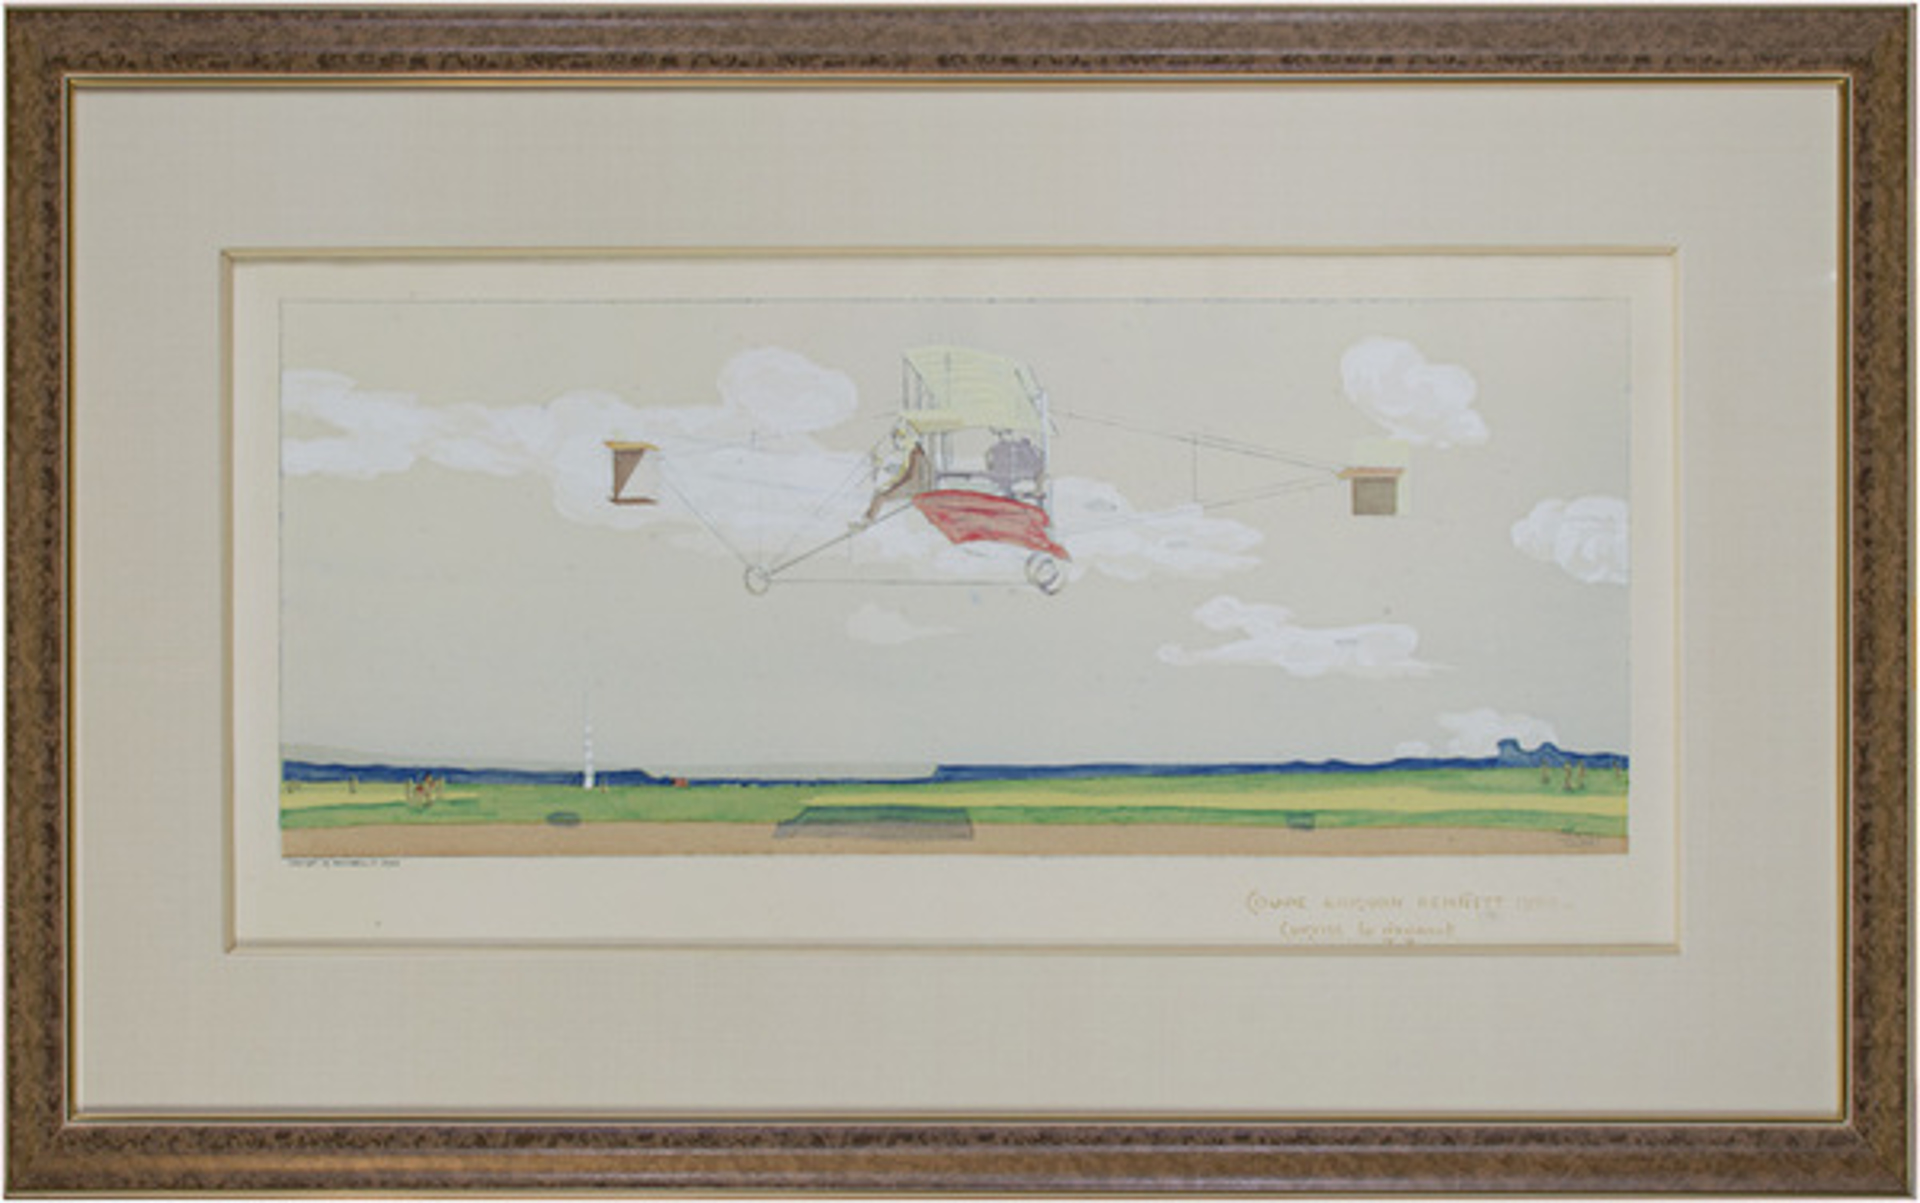 Coupe Gordon Bennett 1909 — Curtiss le Gagnant (airplane) by Marguerite Montaut (GAMY)